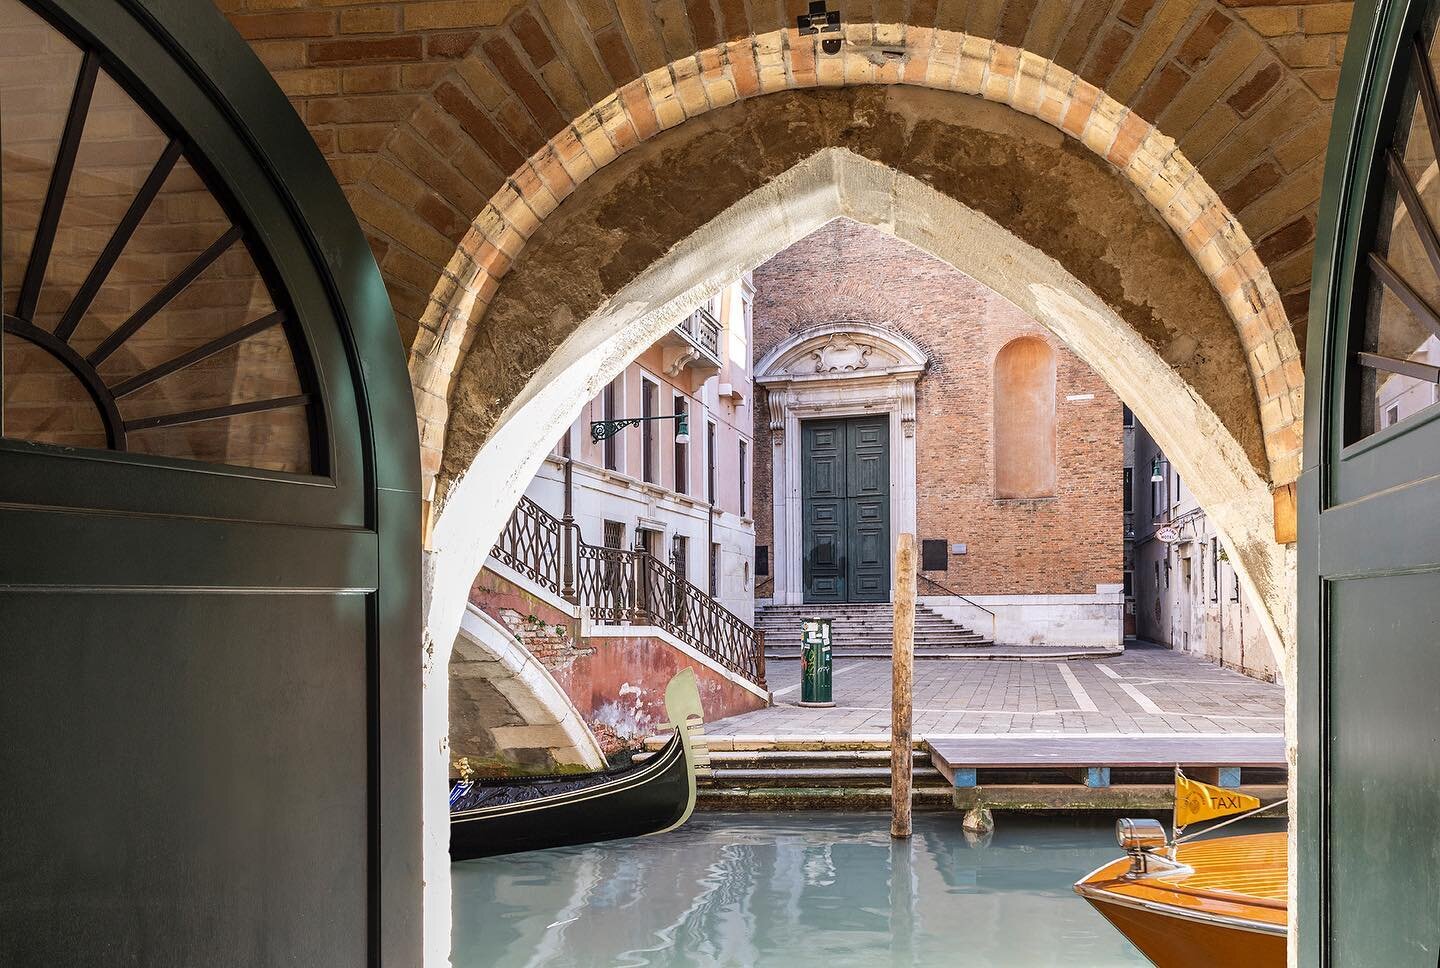 Welcome to Rialto, a series of Luxury Short Rental Apartments in a prime location in Venice near Rialto Bridge, that we designed and renewed, operated by BEMATE.
Through this extensive restoration project we have created a luxury space to stay when v